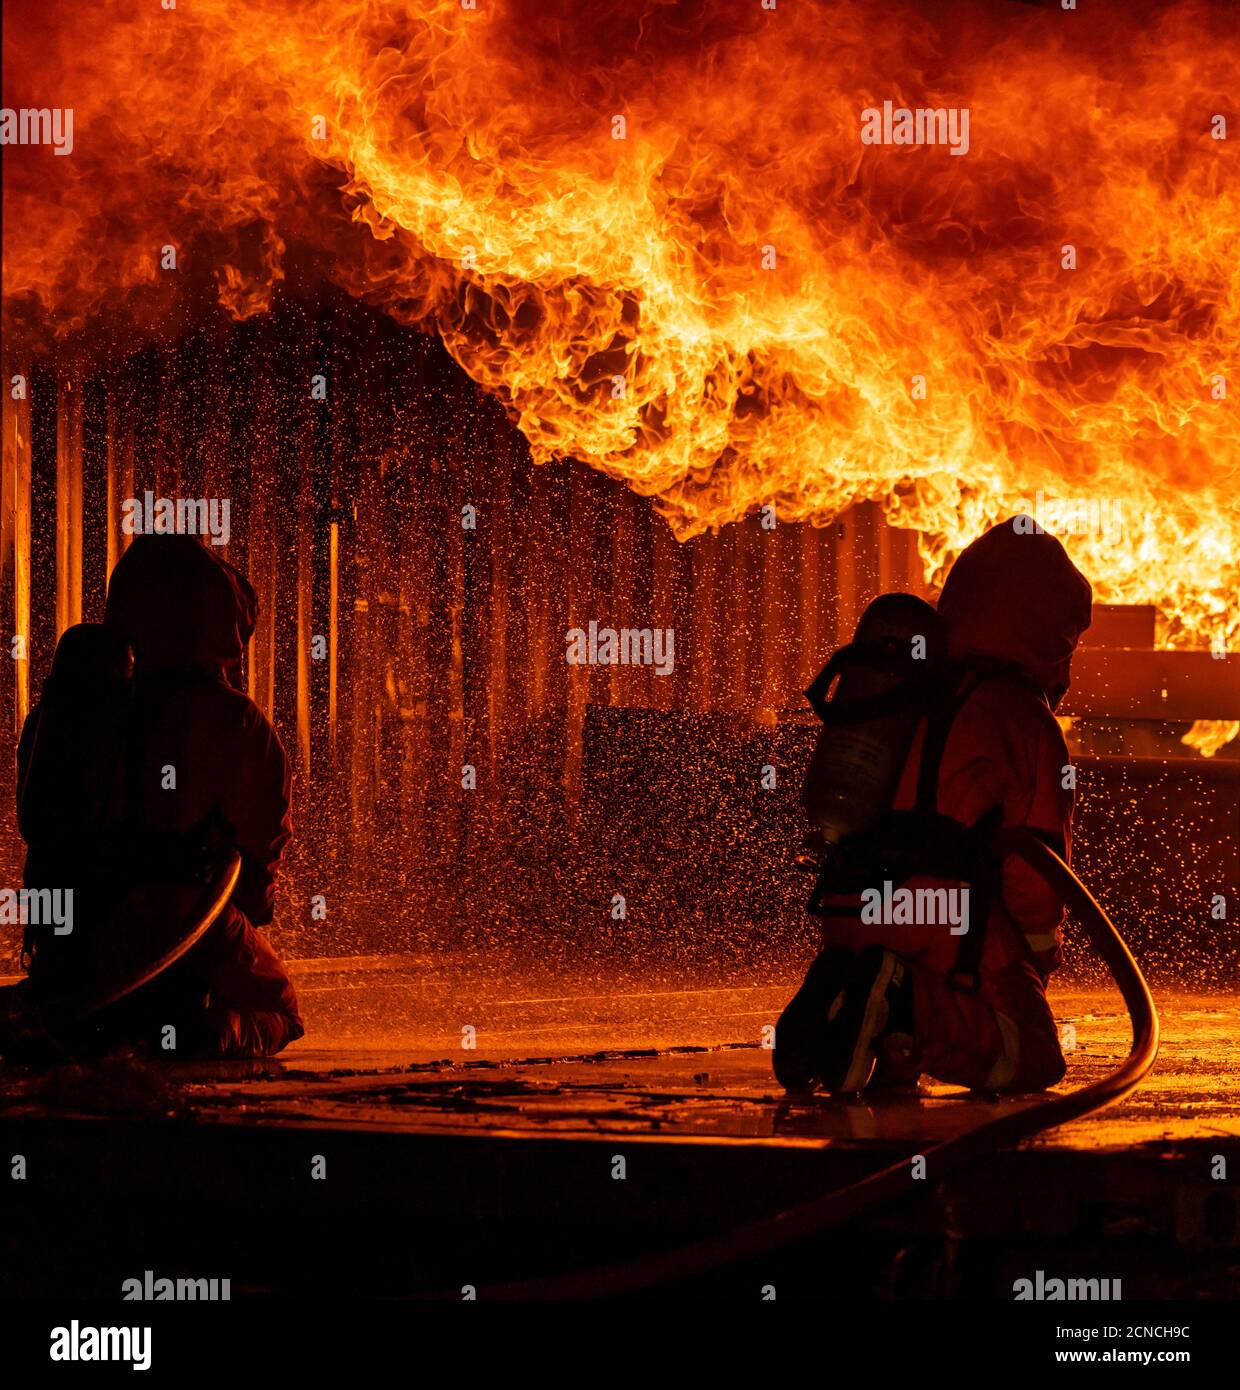 Firefighters use water fog spraying down fire flame in building. Stock Photo